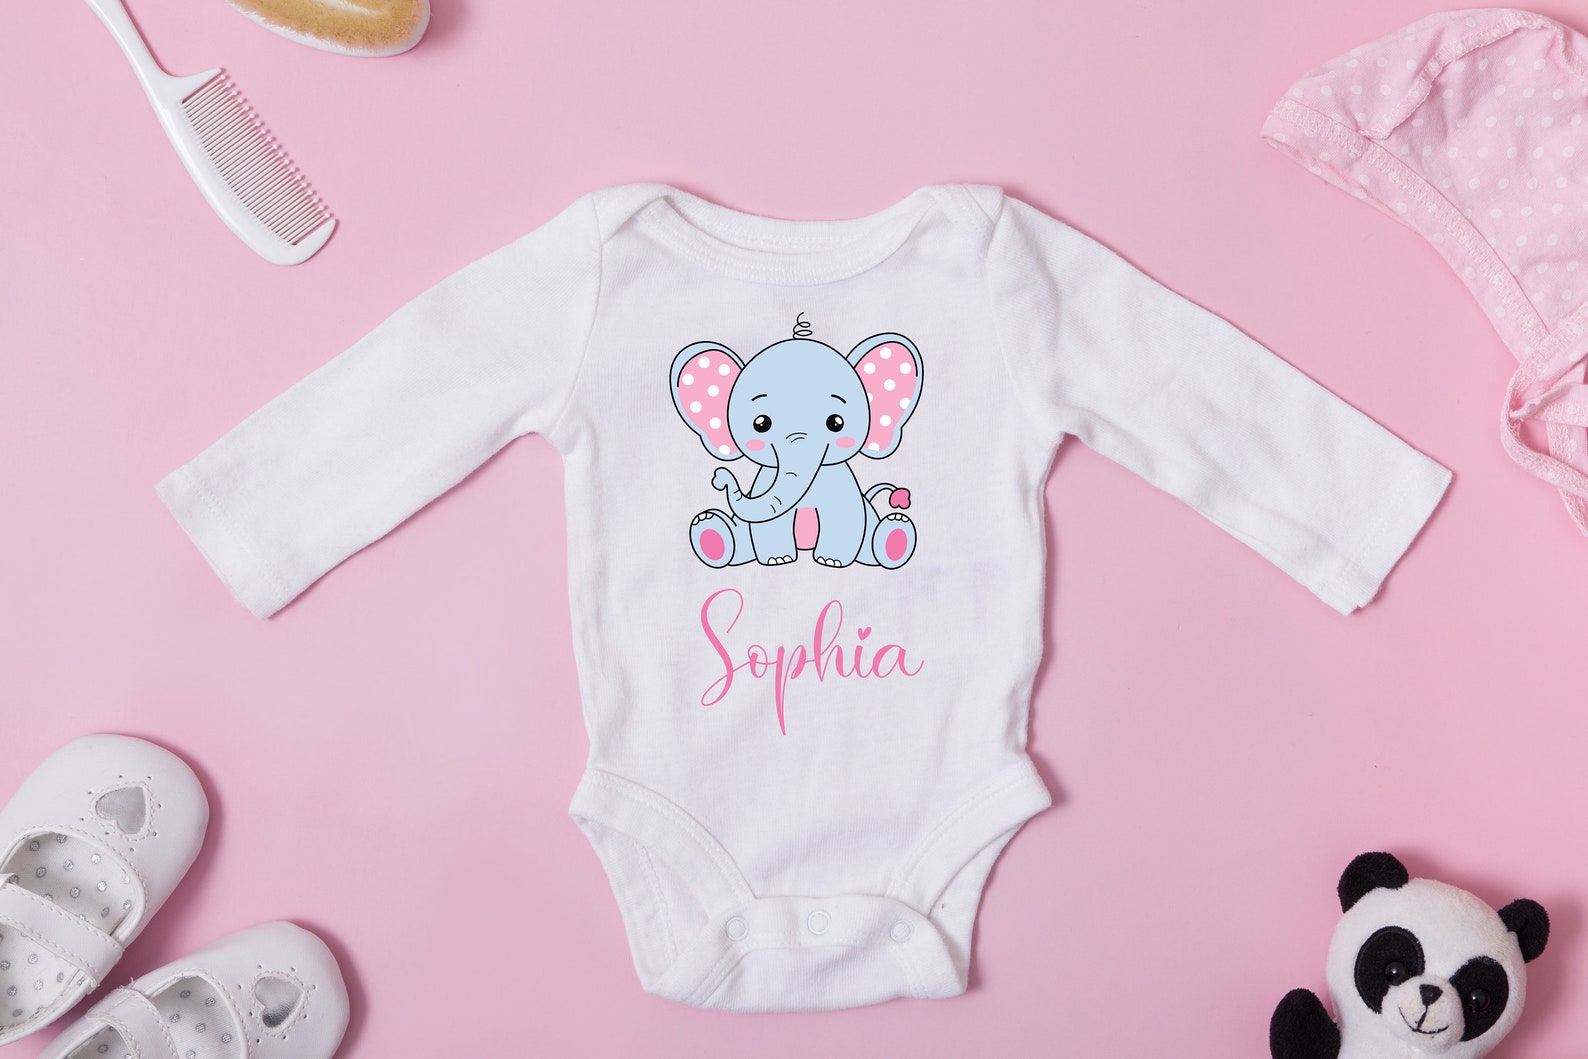 Baby girl's personalized bodysuit and shoes on a pink background.